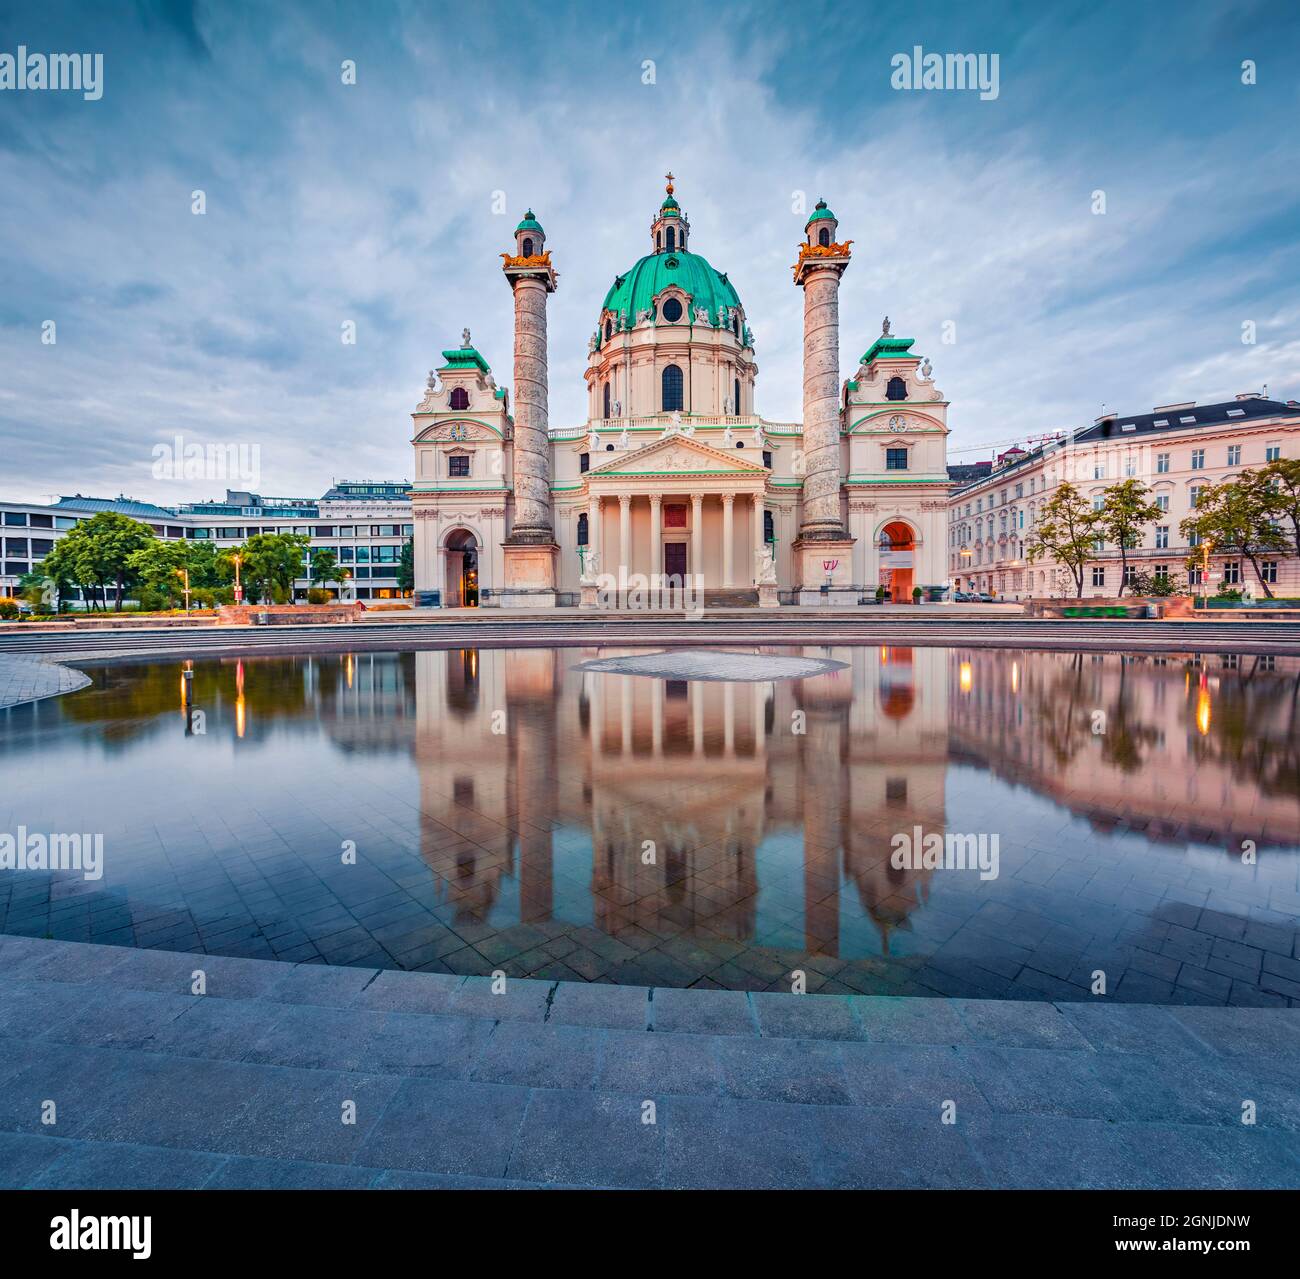 Dramatic spring view of baroque church Karlskirche (St. Charles's Church), the most outstanding baroque church in Vienna. Splendid morning scene of ca Stock Photo